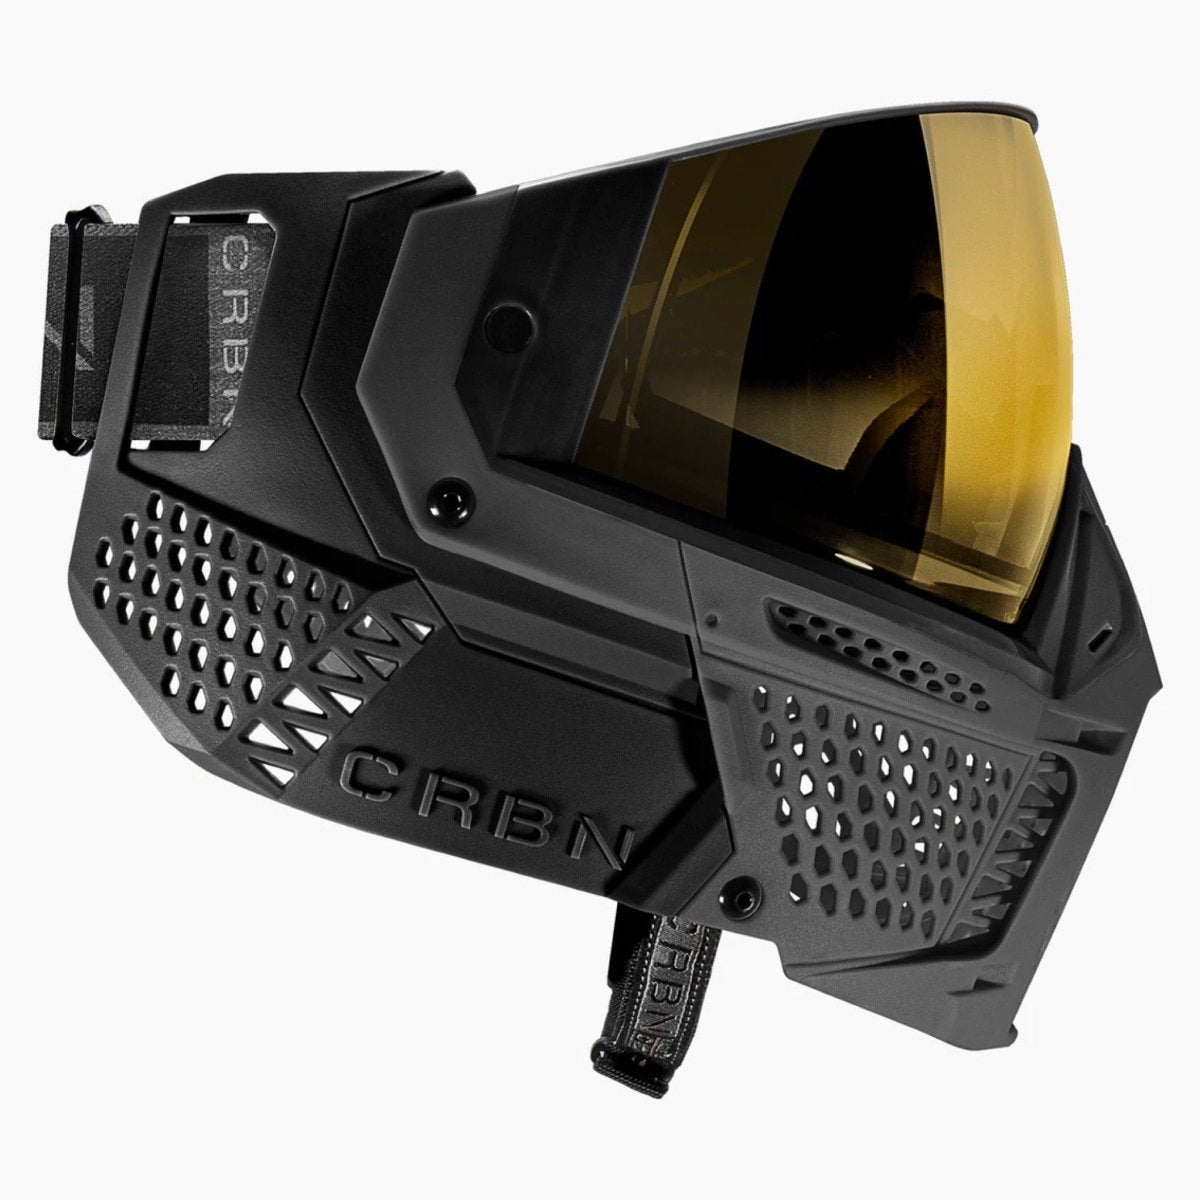 CRBN ZERO SLD Goggles - COAL - Time 2 Paintball